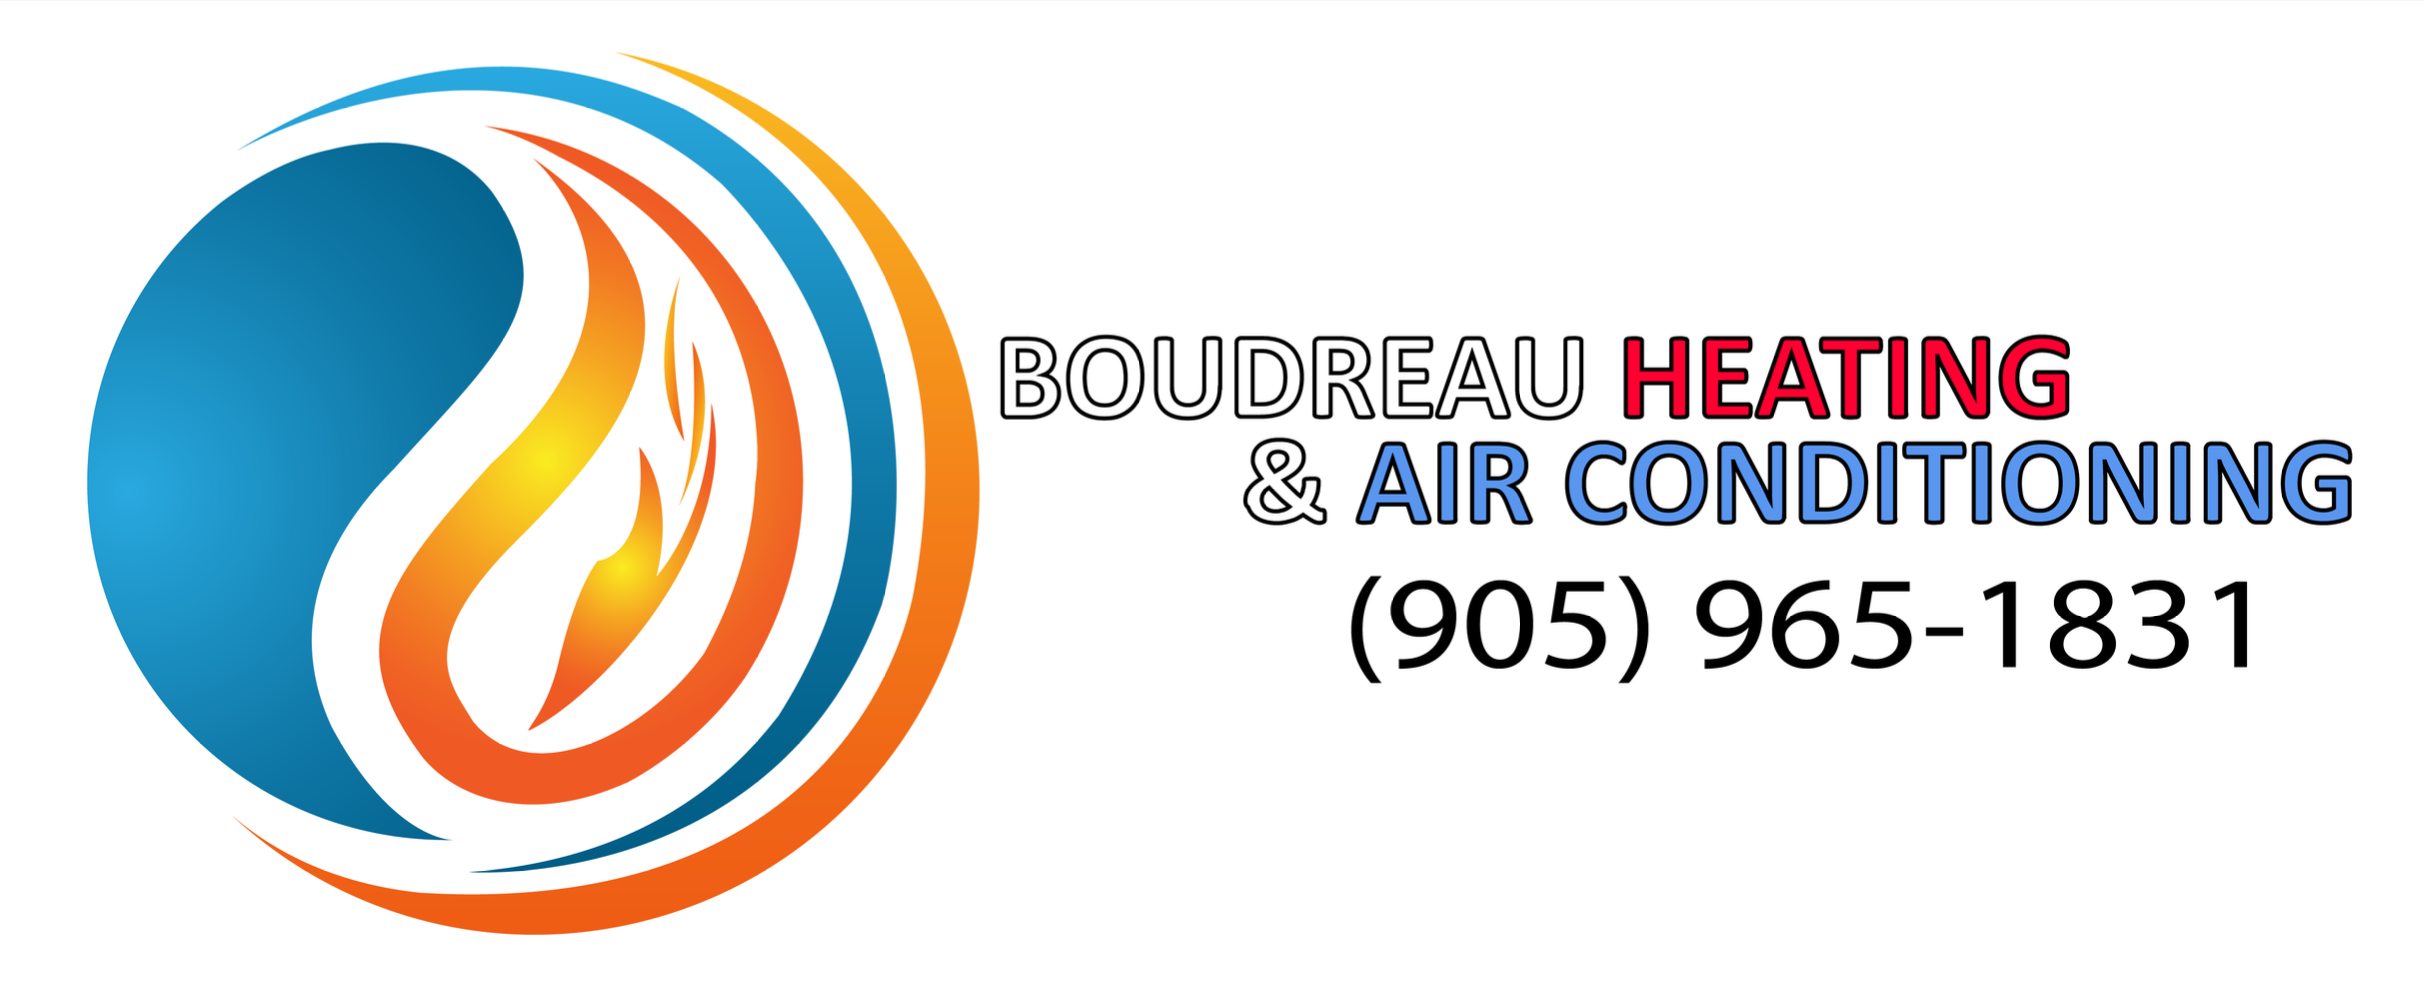 Boudreau Heating and Air Conditioning